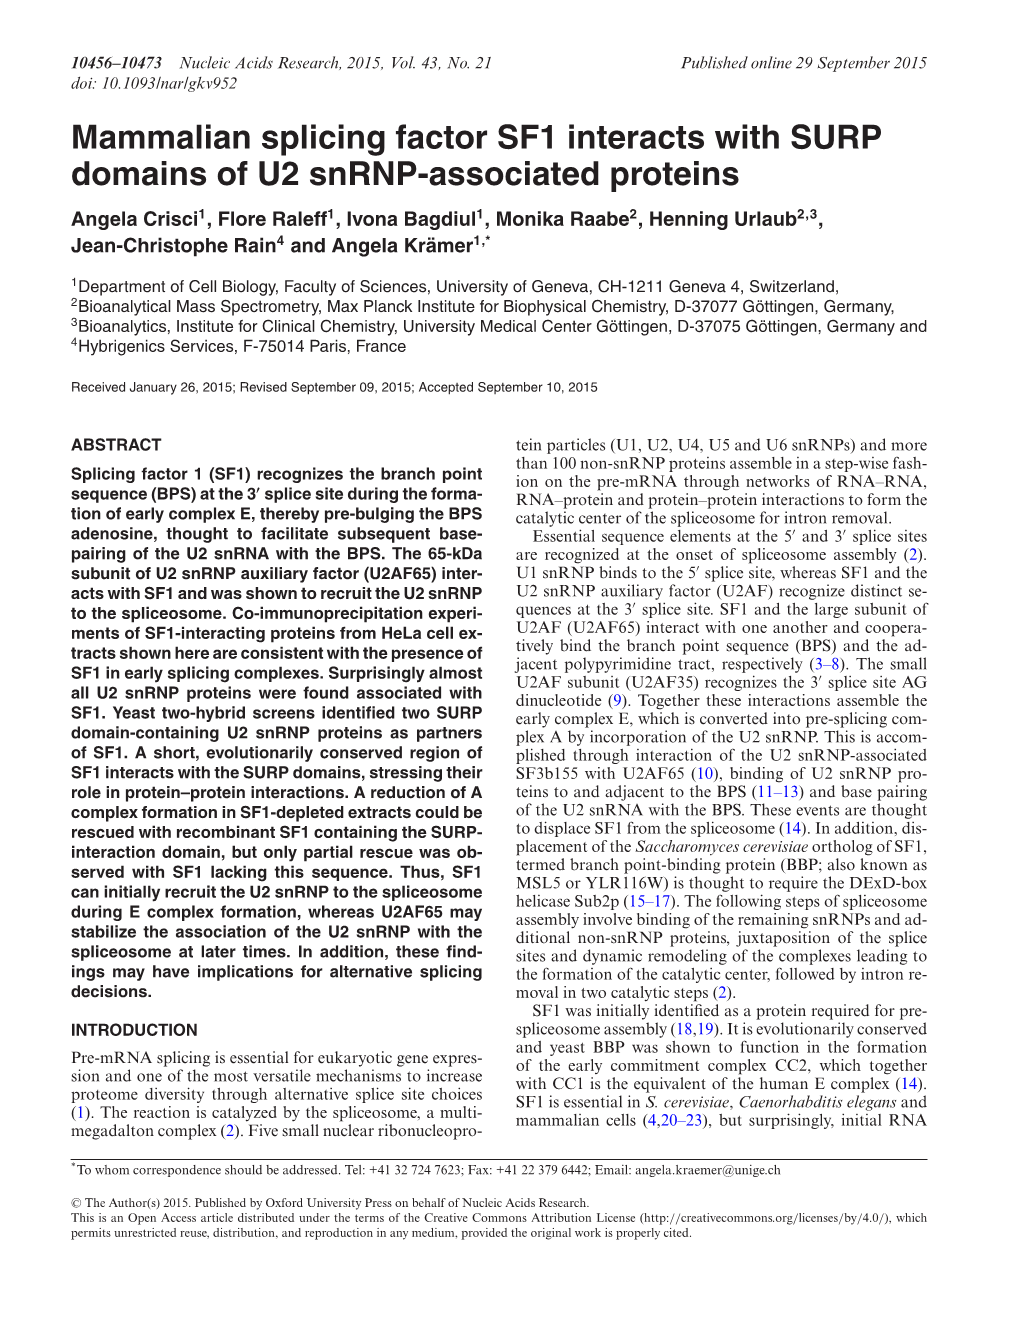 Mammalian Splicing Factor SF1 Interacts with SURP Domains of U2 Snrnp-Associated Proteins